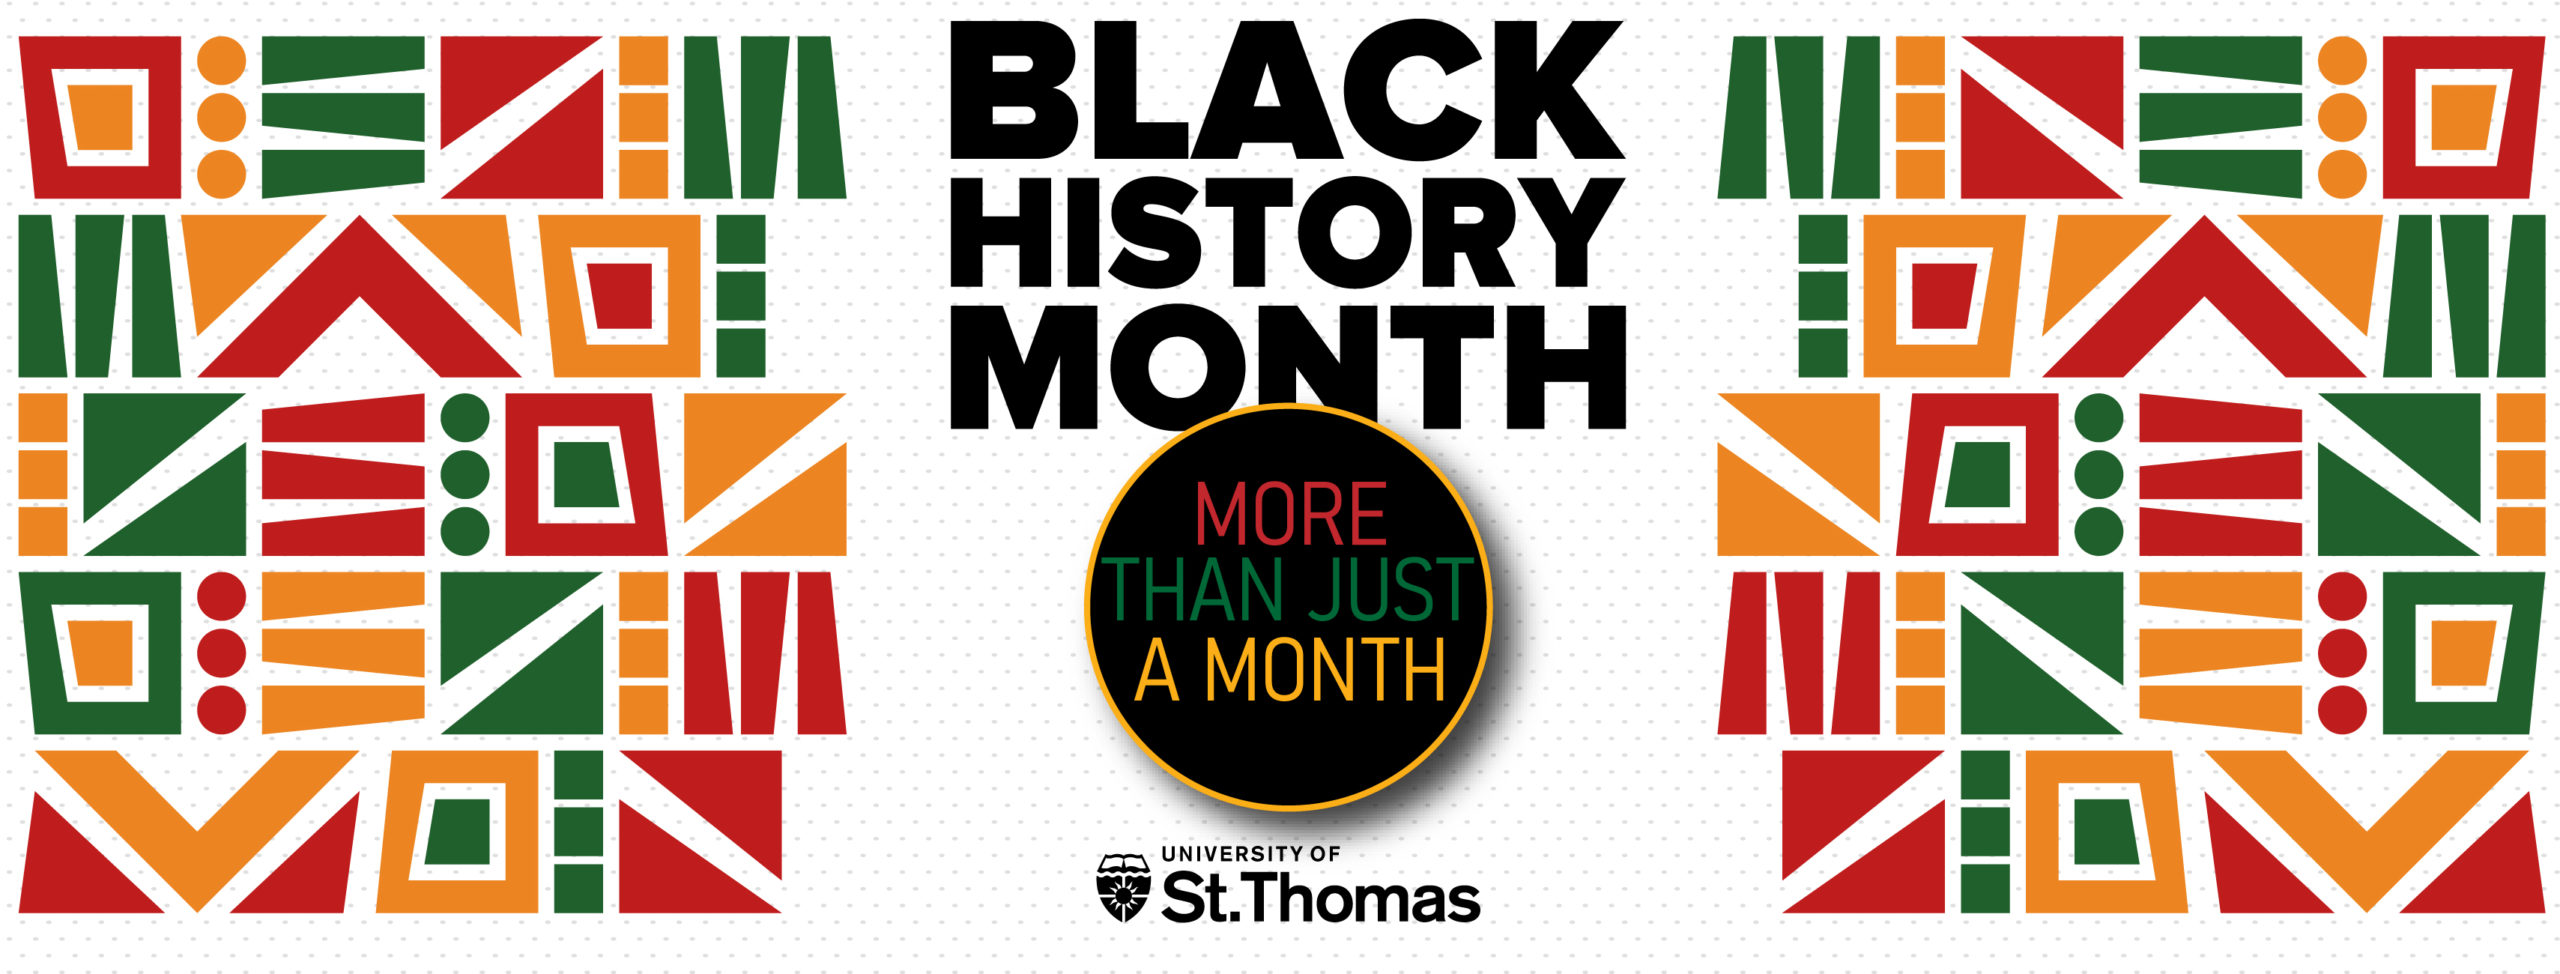 Black History month - more than just a month graphic